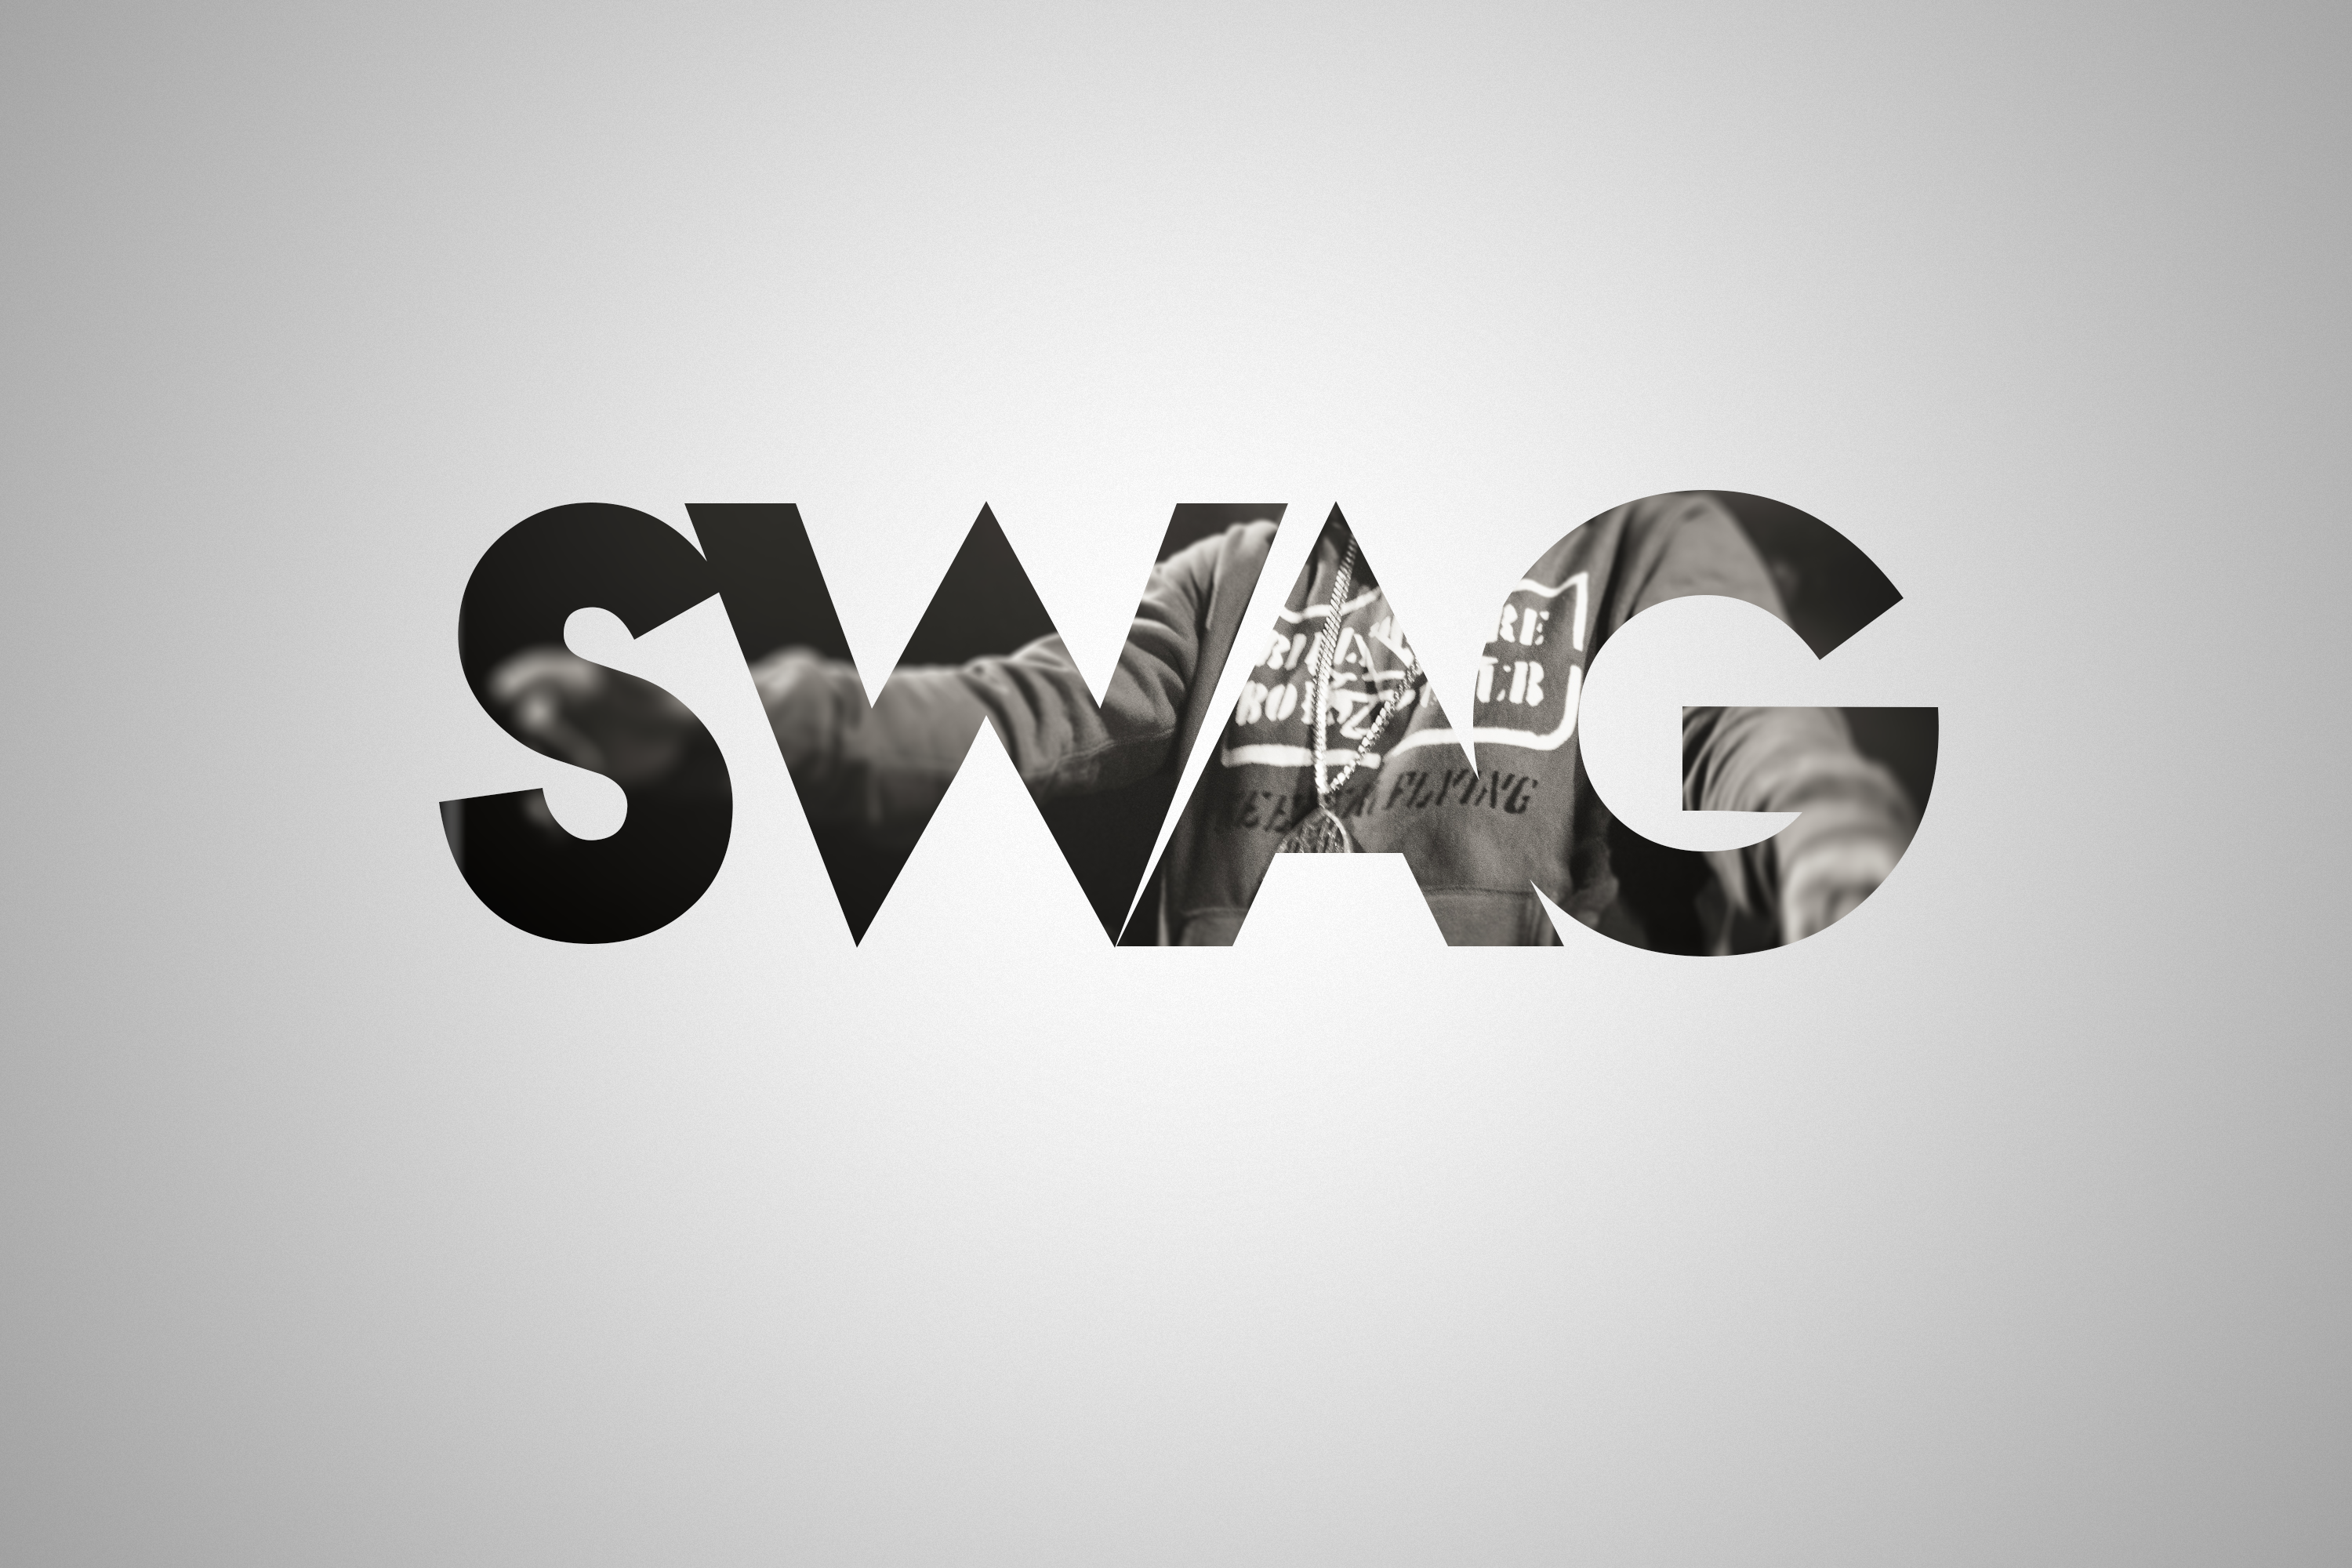 SWAG pictures, photos and SWAG style wallpapers /